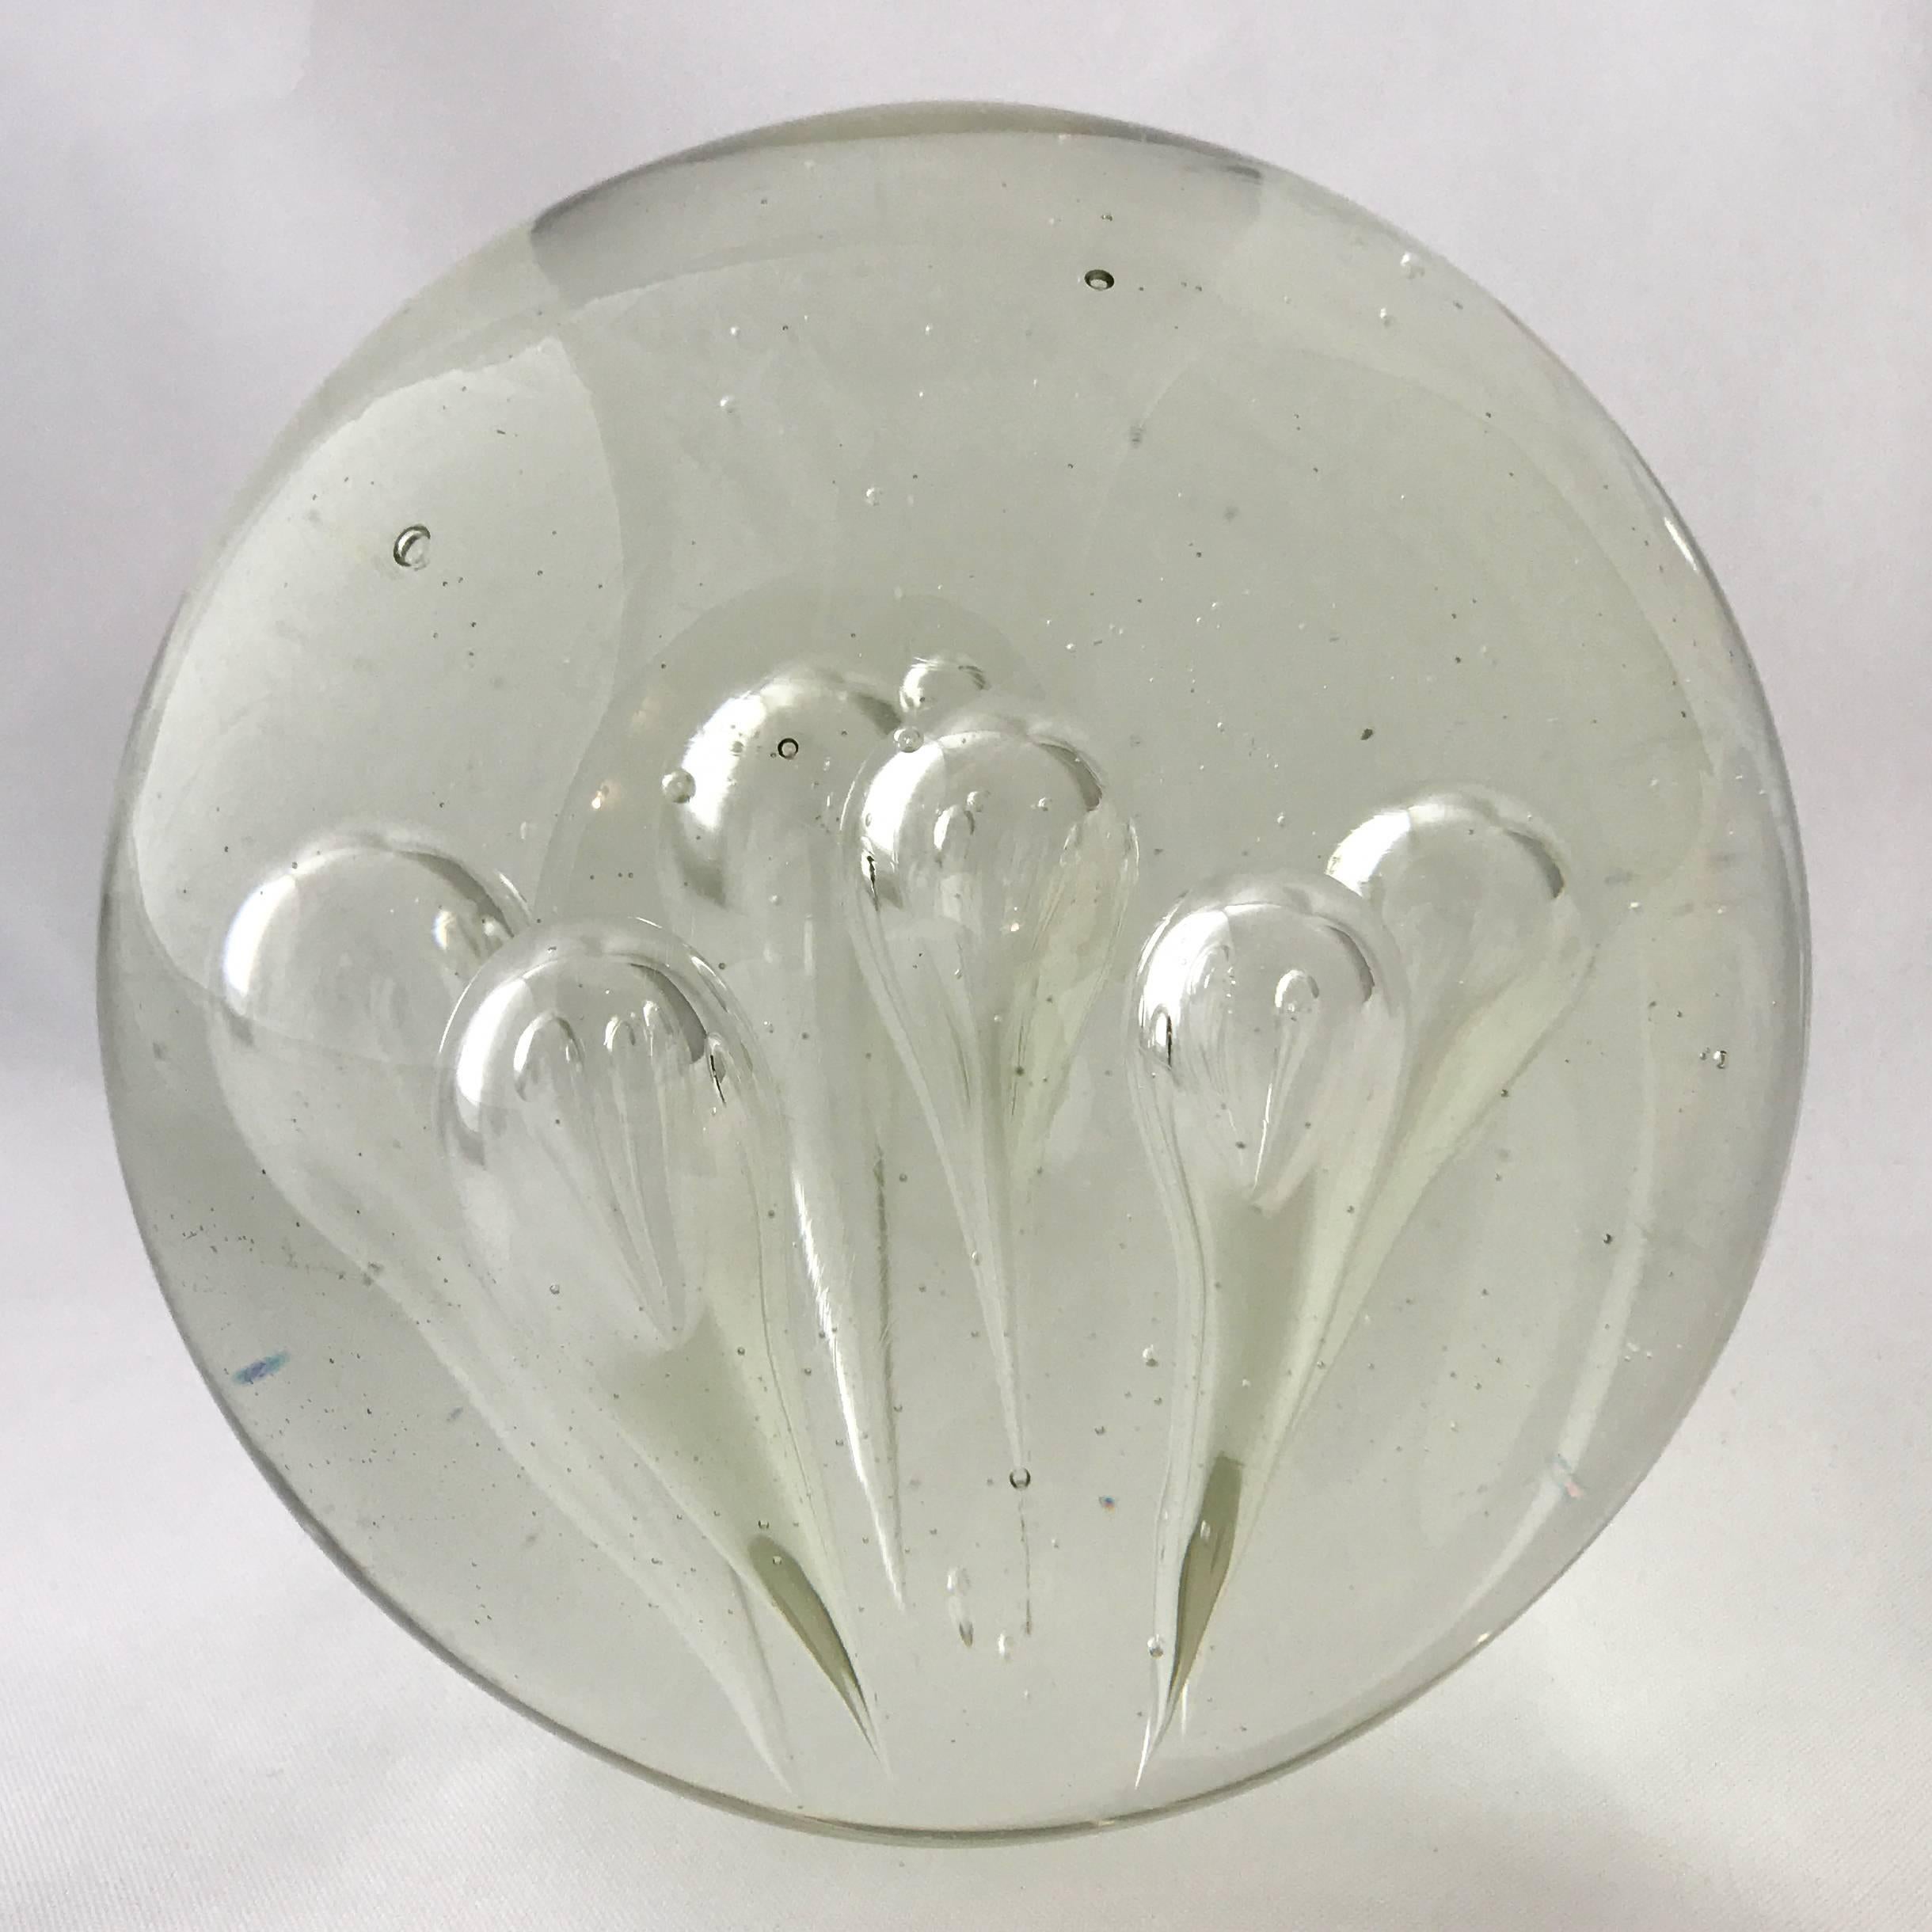 Large decorative Murano glass sphere with six large teardrop-shaped internal bubbles. A beautiful sculptural object on its own, or would make a substantial bookend. 


